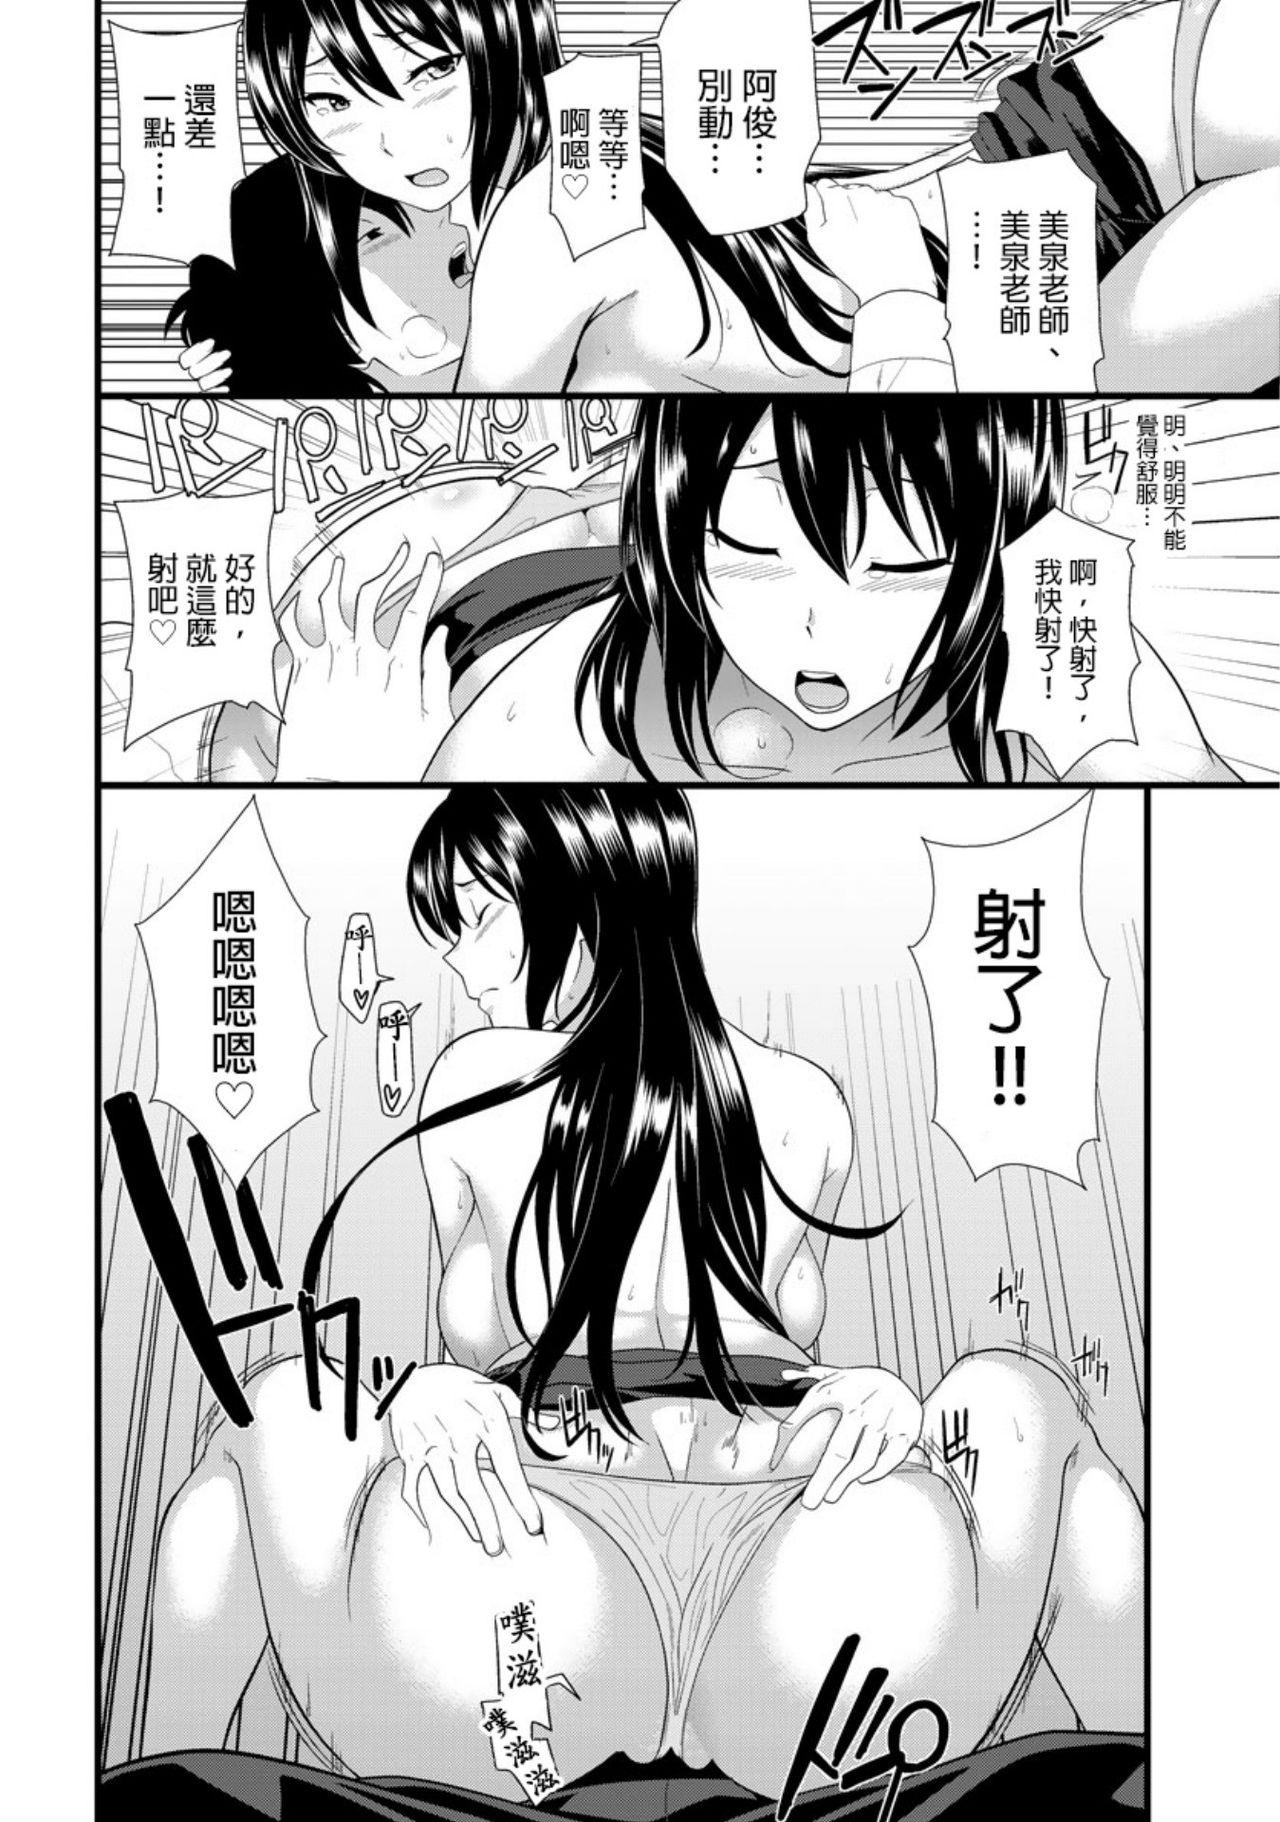 Deep Throat 教え子に襲ワレル人妻は抵抗できなくて Ch.2 Mouth - Page 11